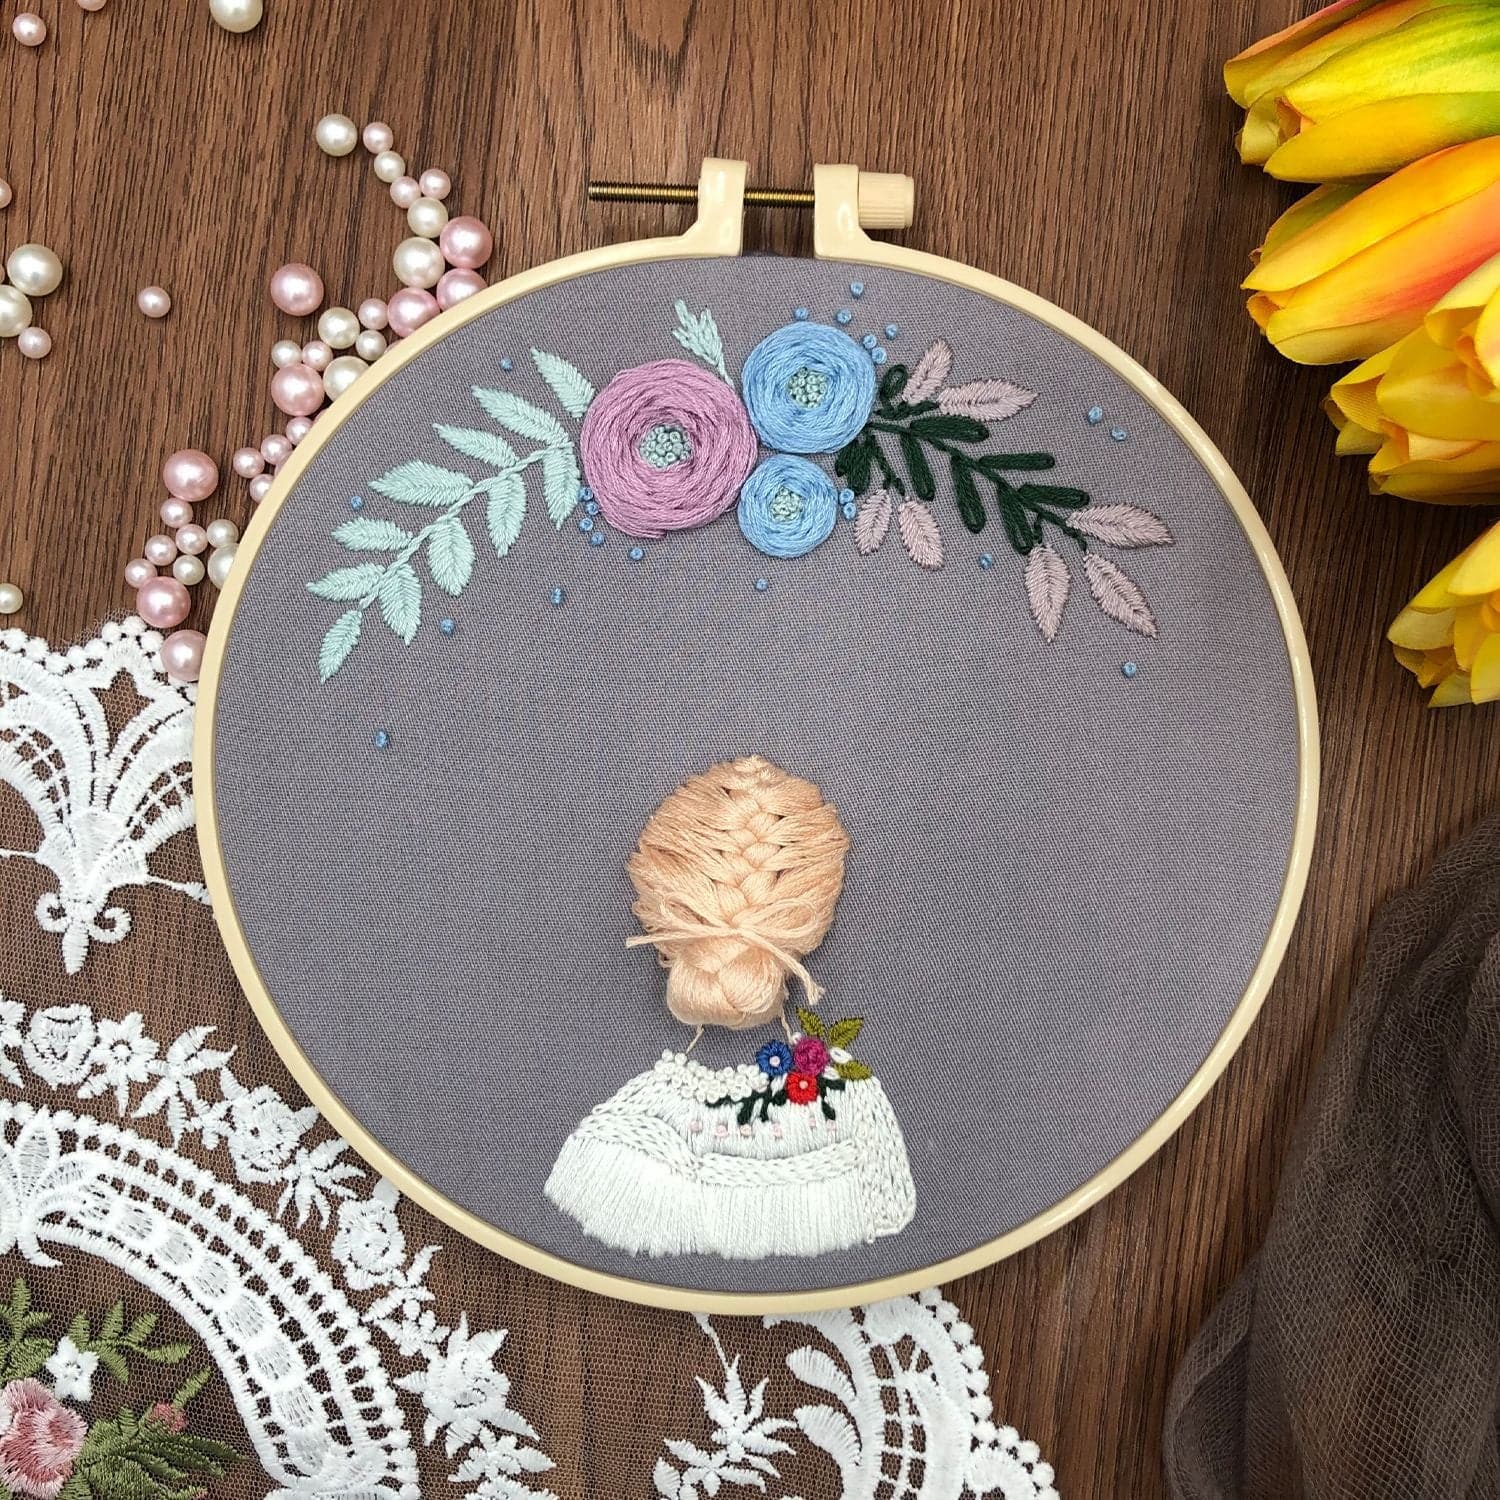 Girl with flowers-Embroidery ktclubs.com